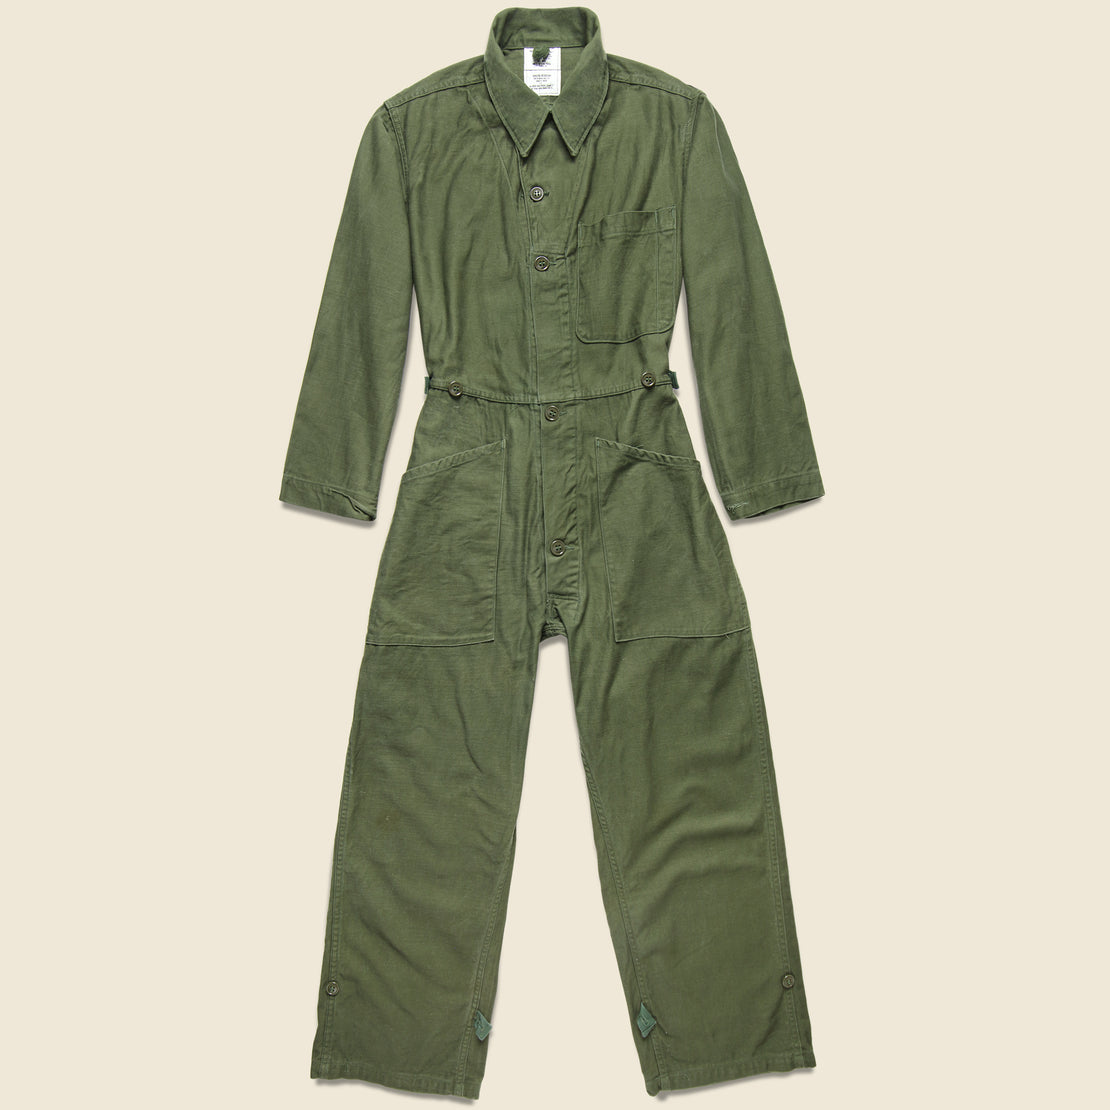 Vintage Cotton Sateen Type I Military Coverall - Olive Drab